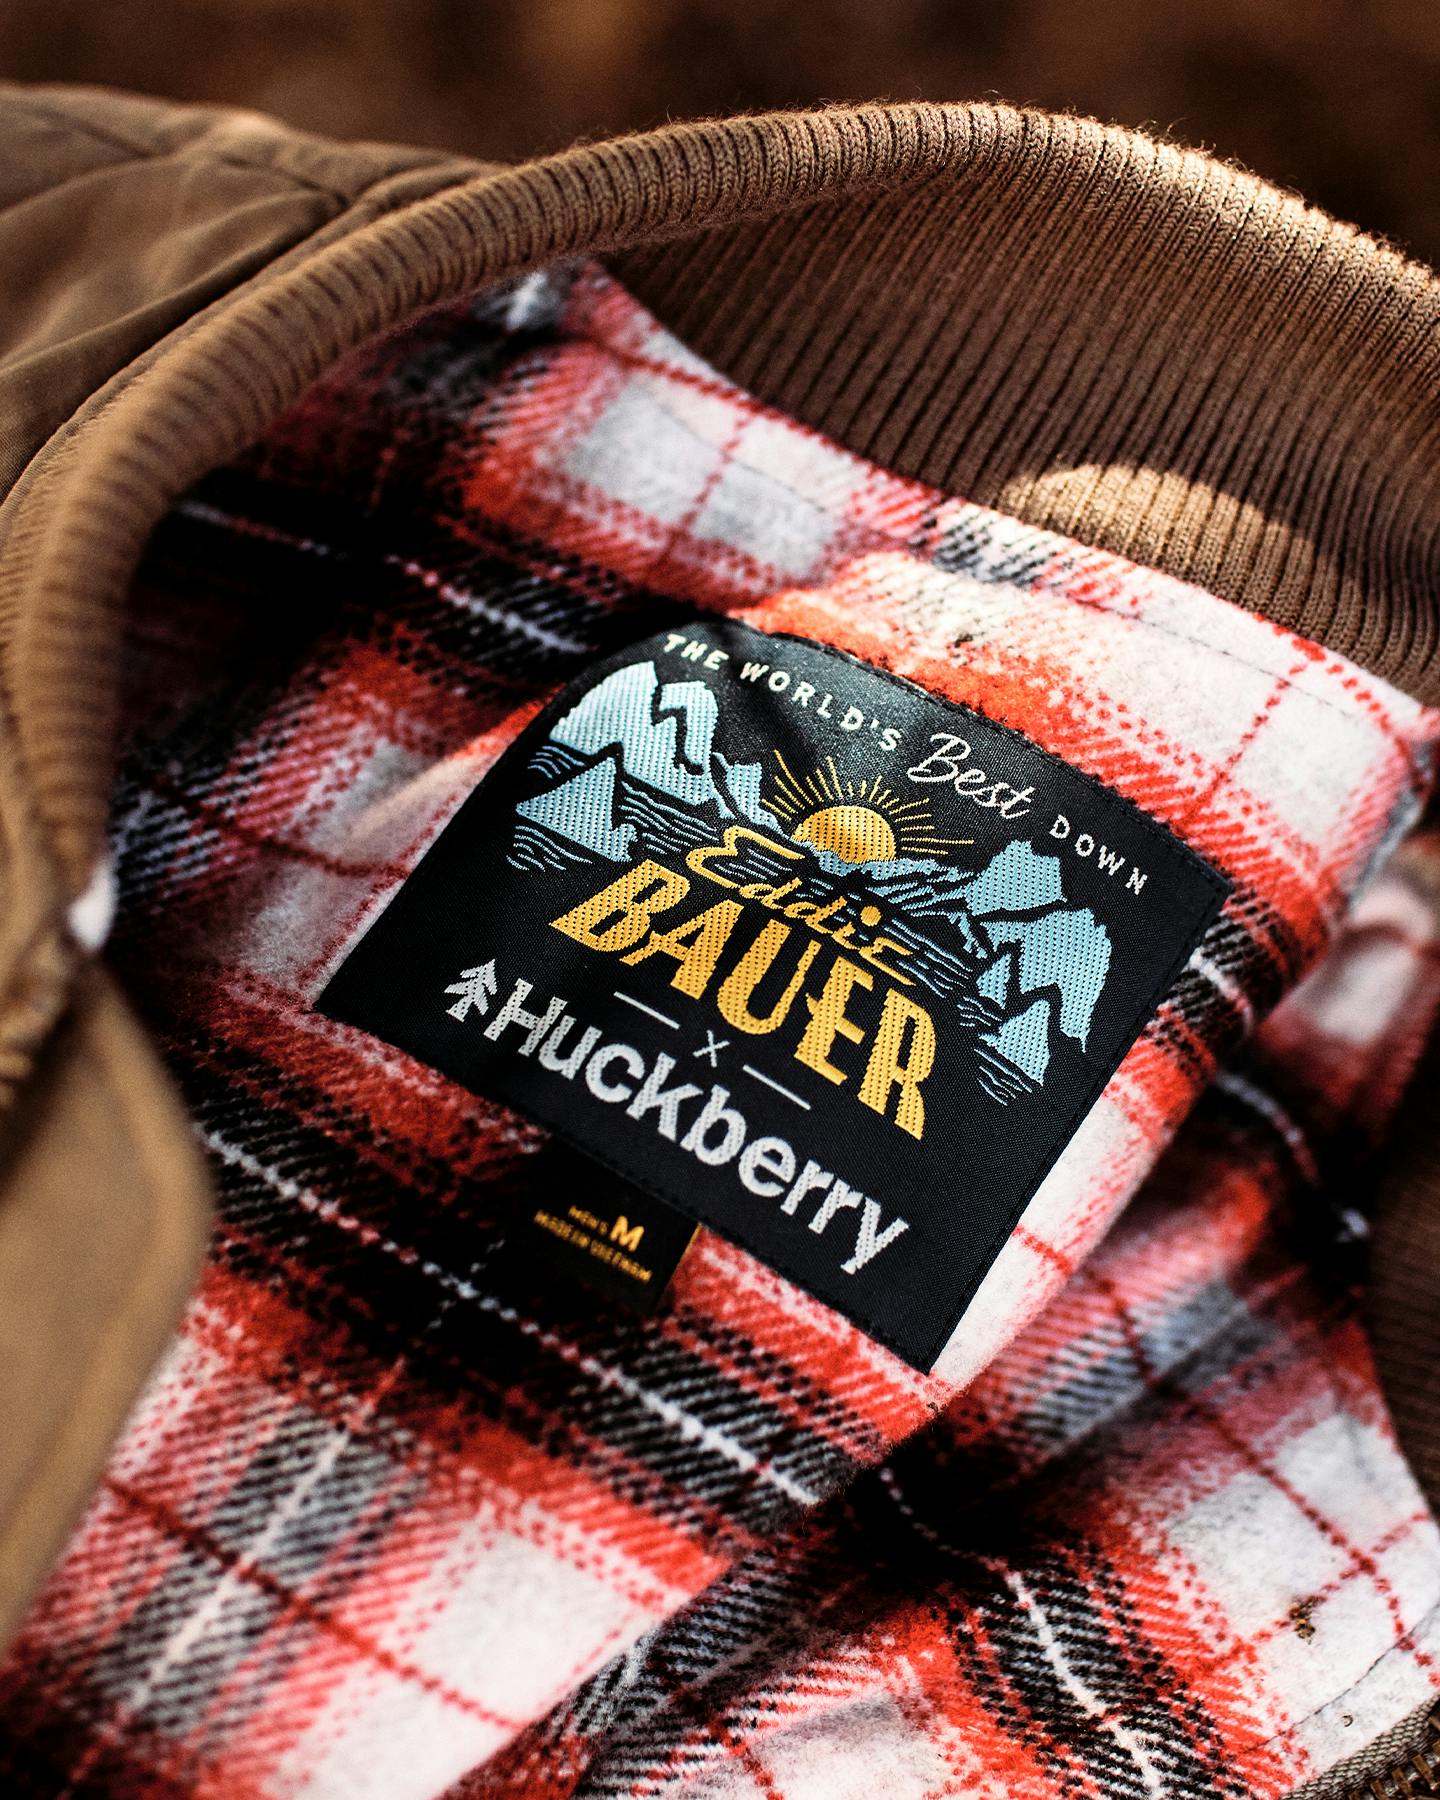 Detail shots of plaid jacket lining and label inside jacket